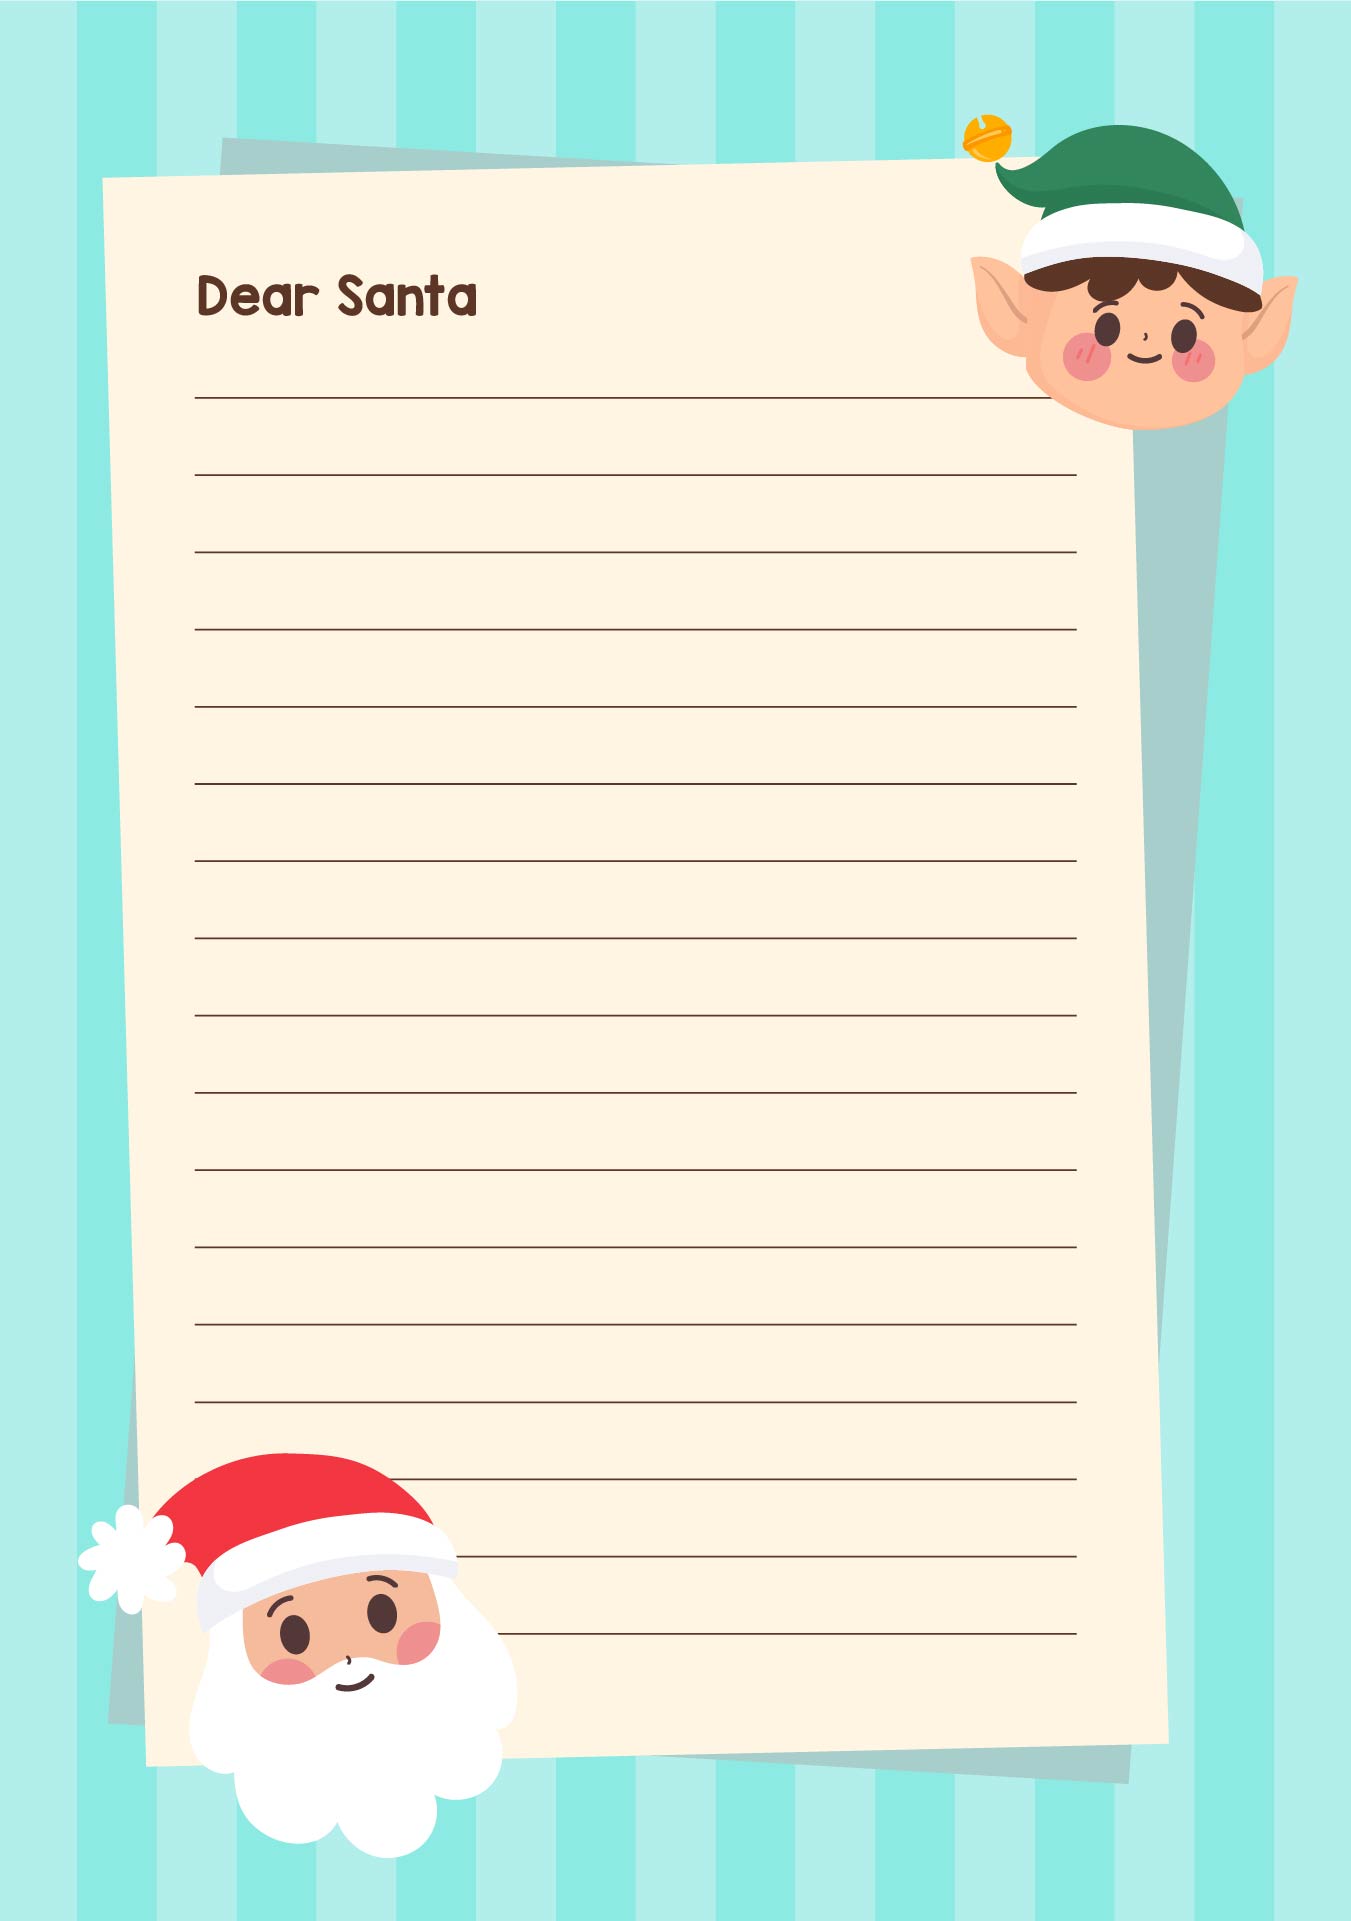 The Elf On The Shelf Santa Claus Paper Template Writing Printable